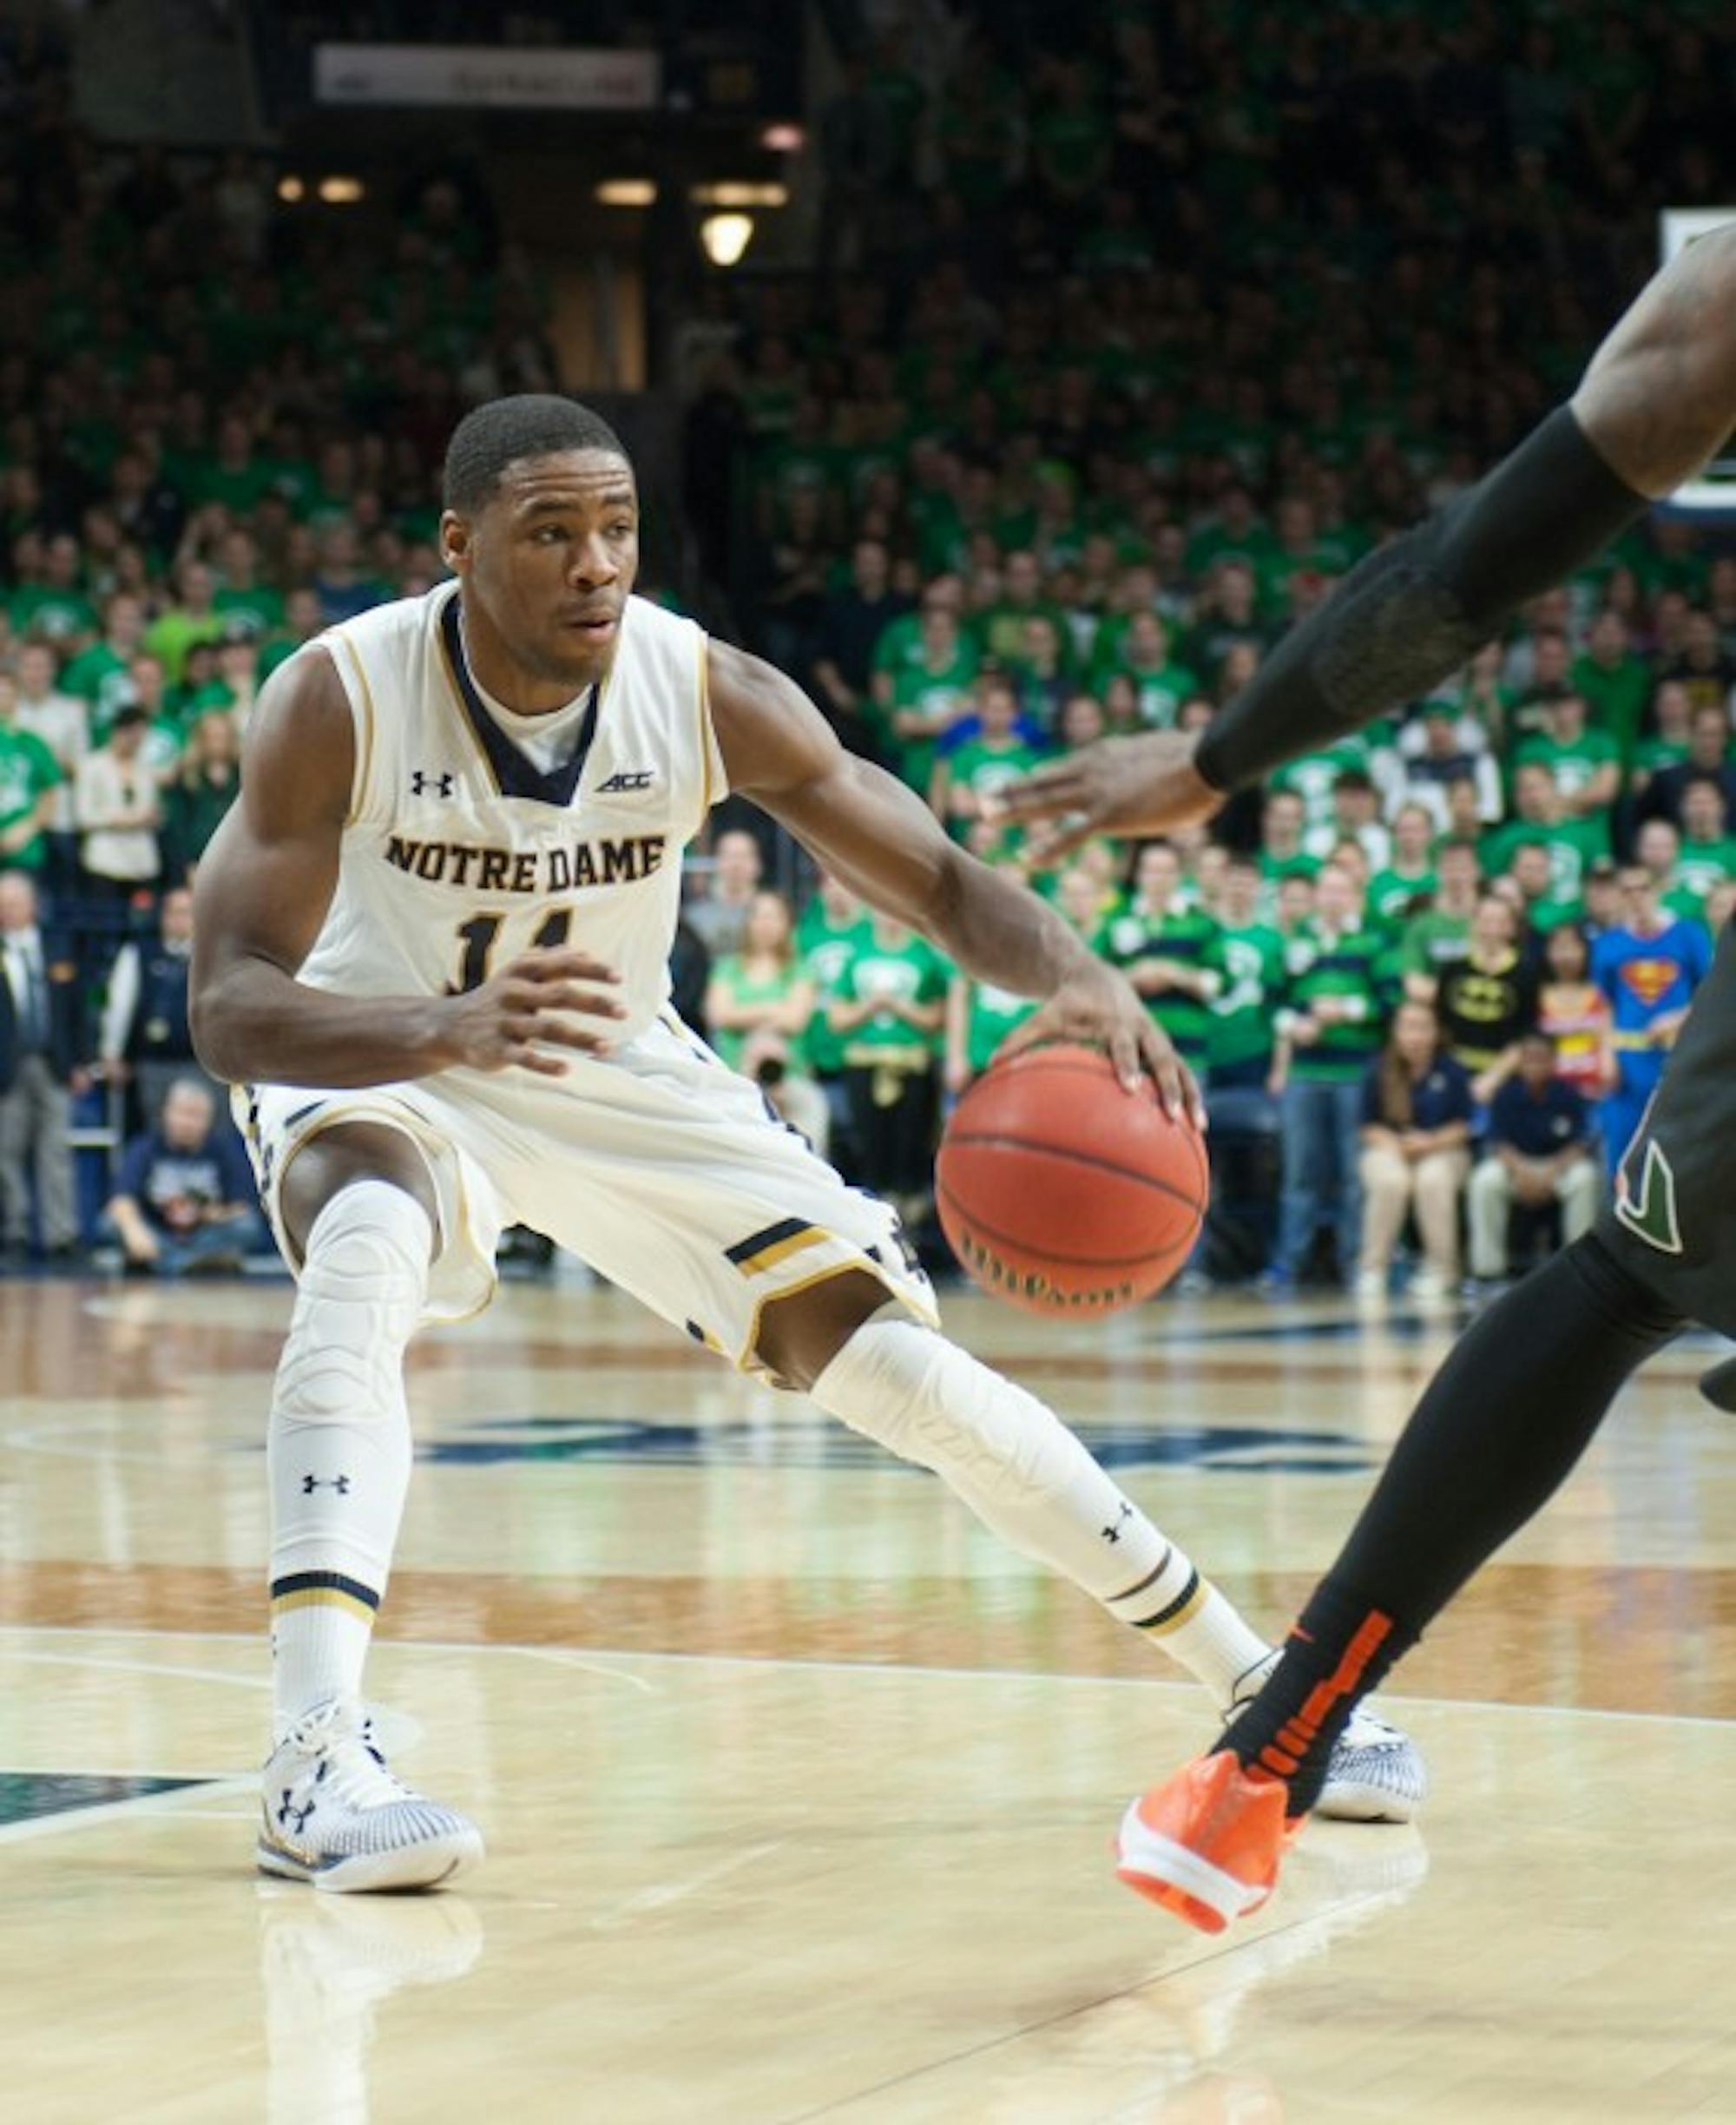 Irish sophomore guard Demetrius Jackson fakes out a defender in Notre Dame’s 75-70 win over Miami on Jan. 17 at Purcell Pavilion.